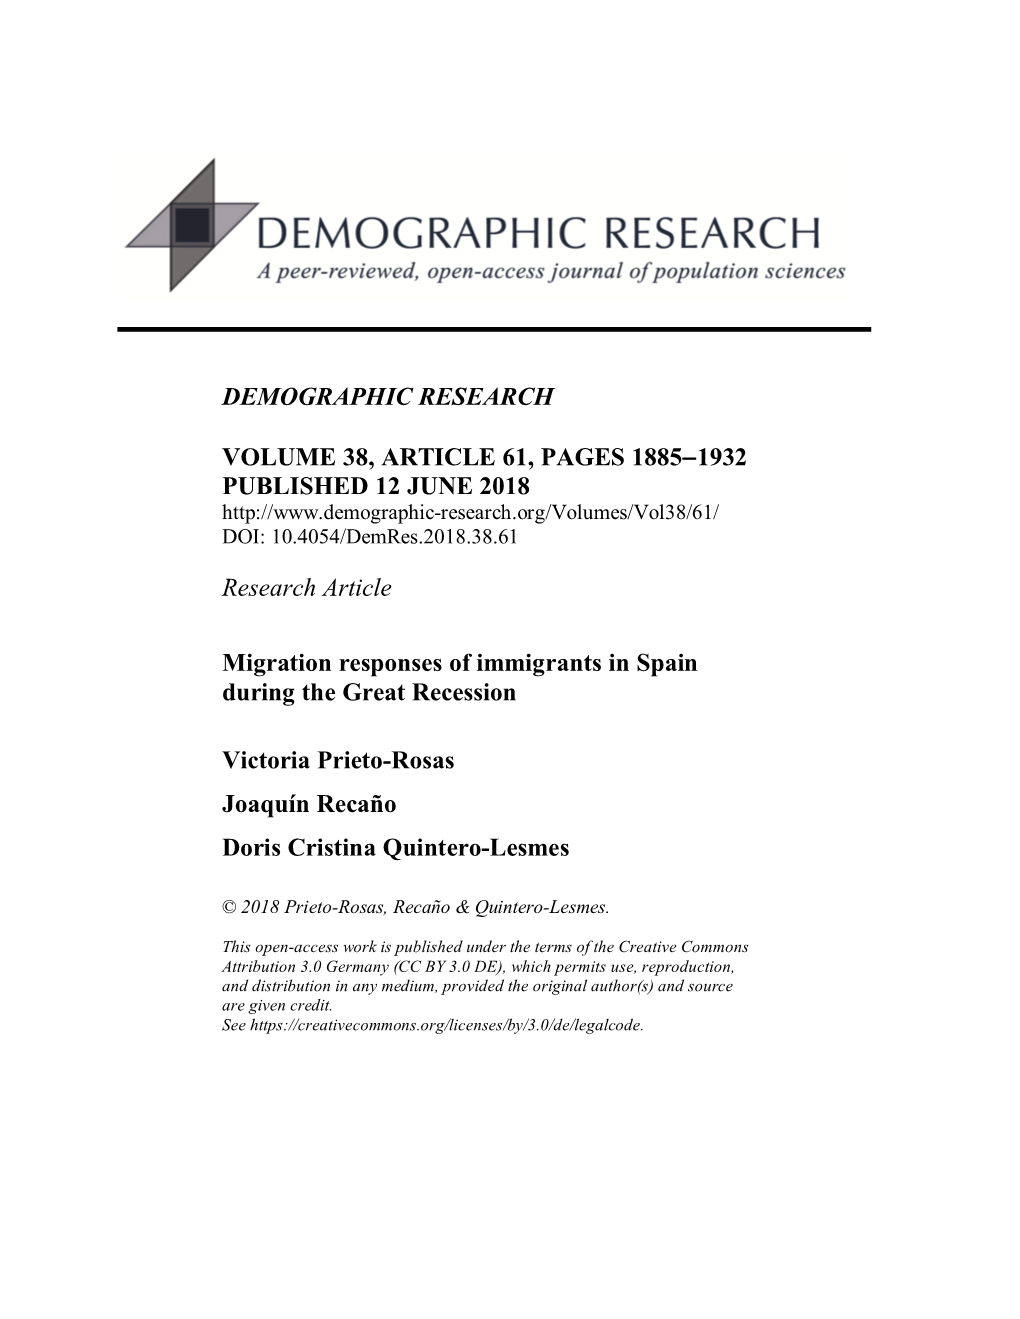 Migration Responses of Immigrants in Spain During the Great Recession